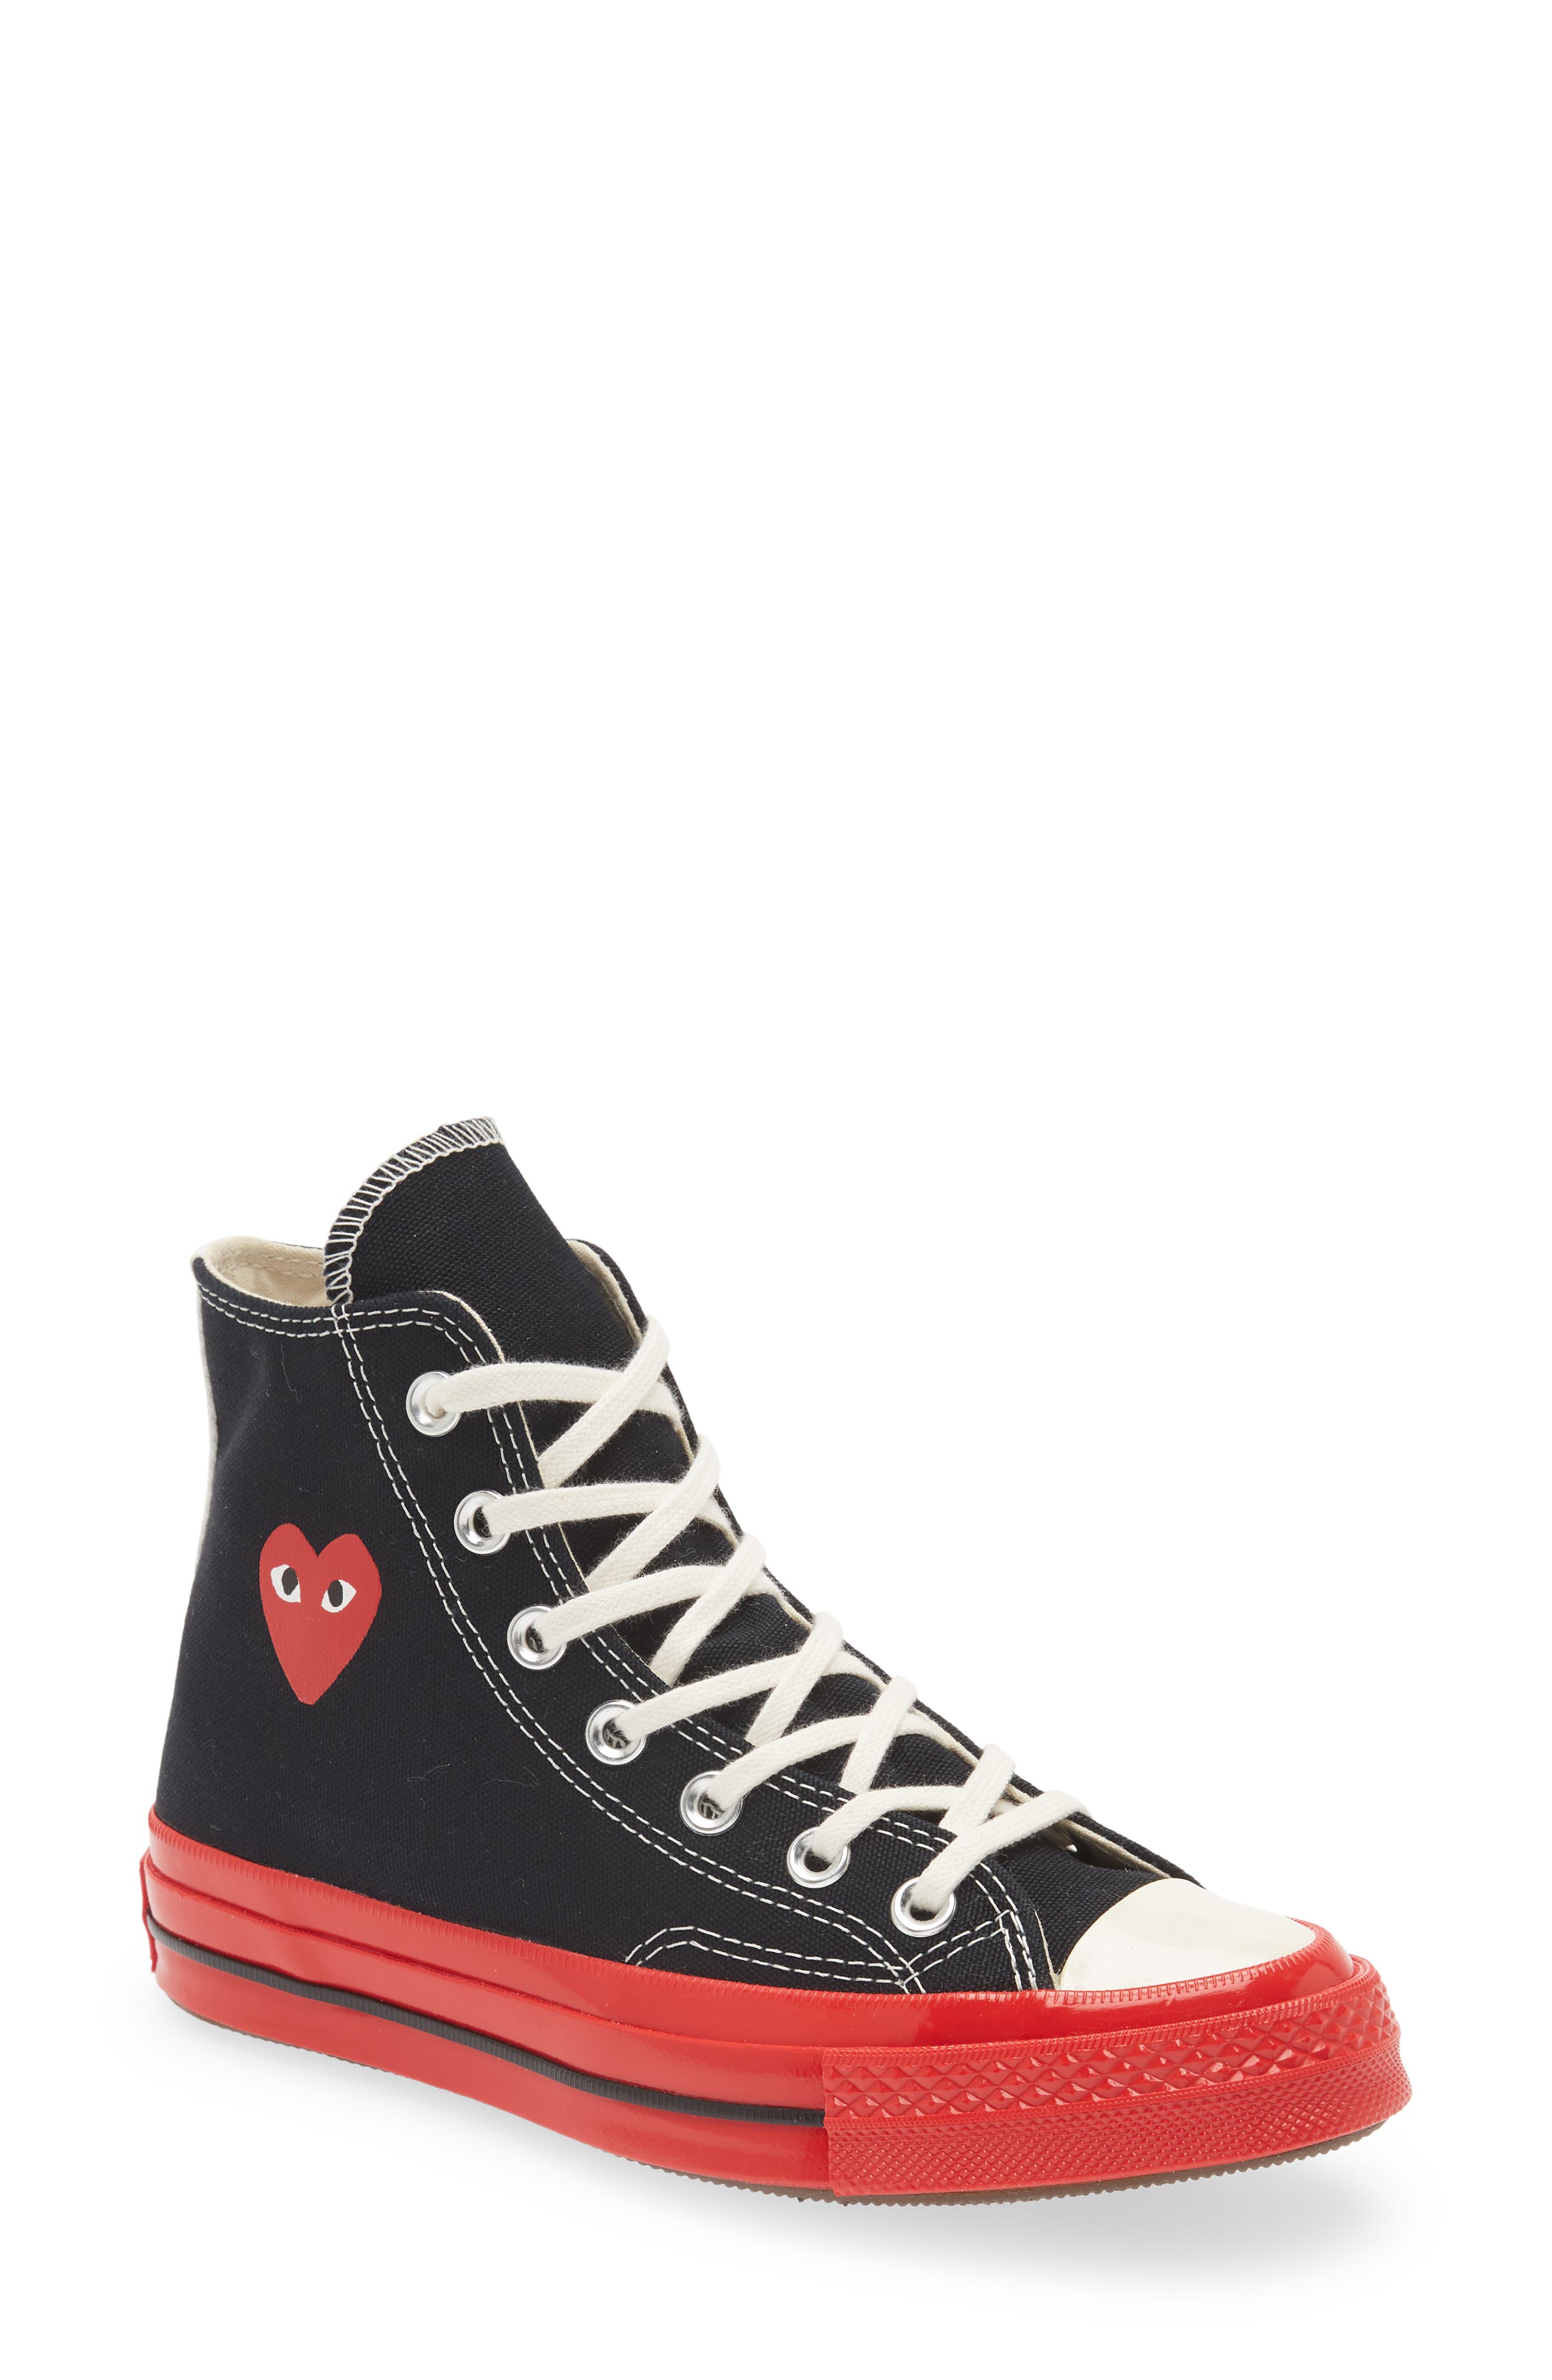 red heart chuck taylors